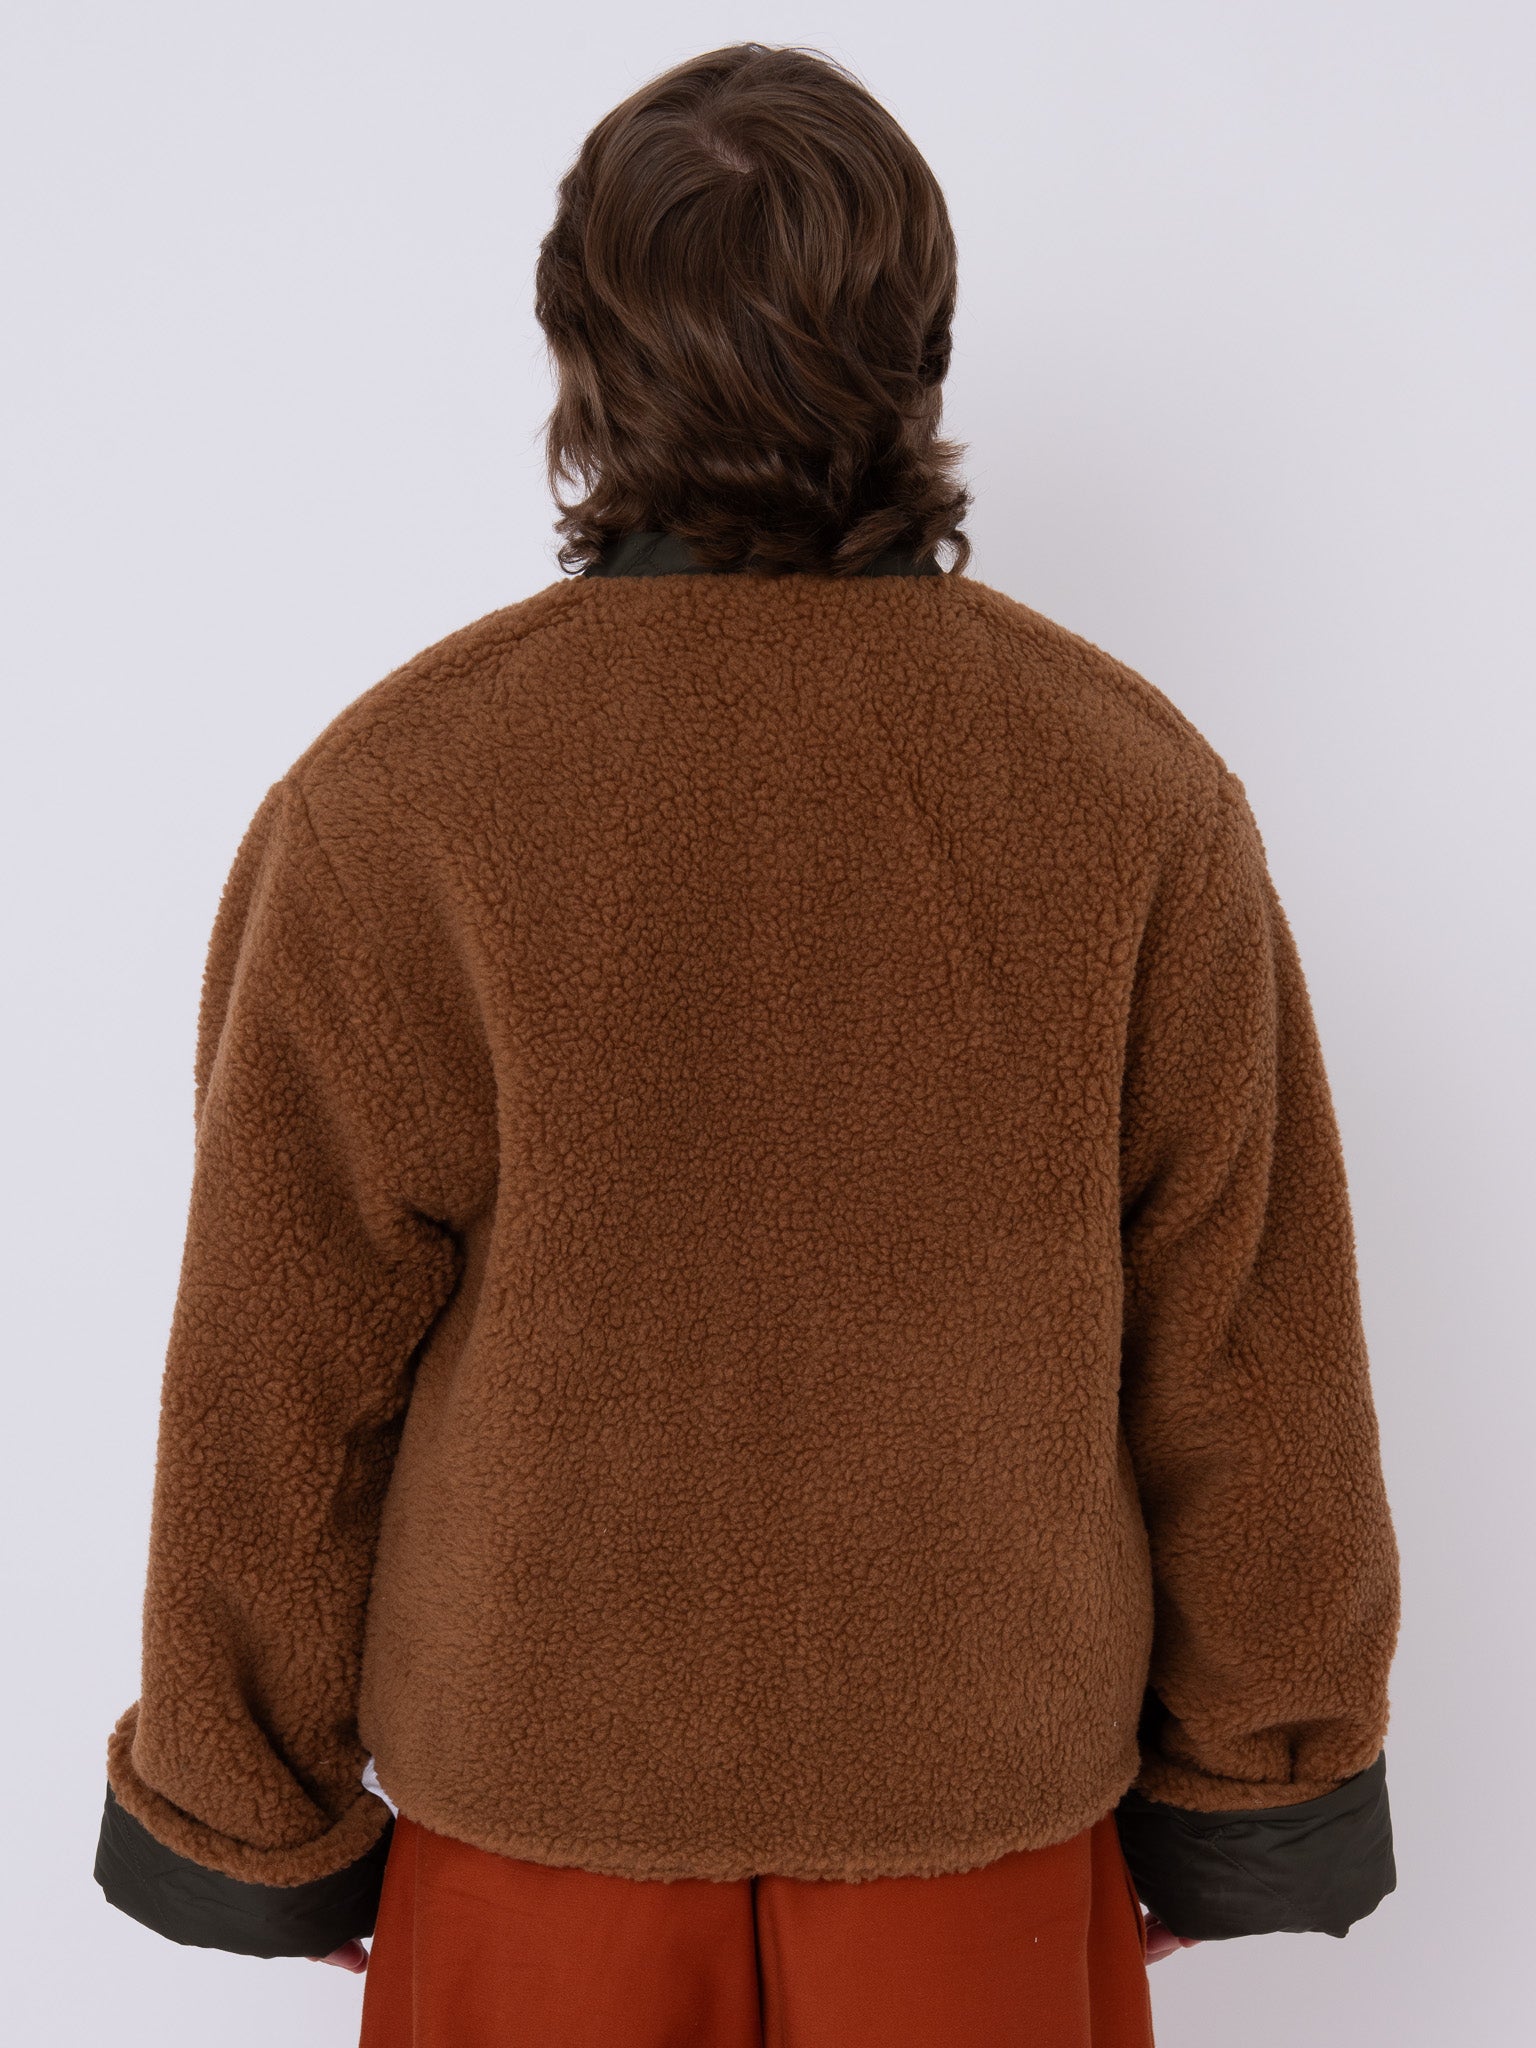 Bomber, back view, padded, double-face, unisex